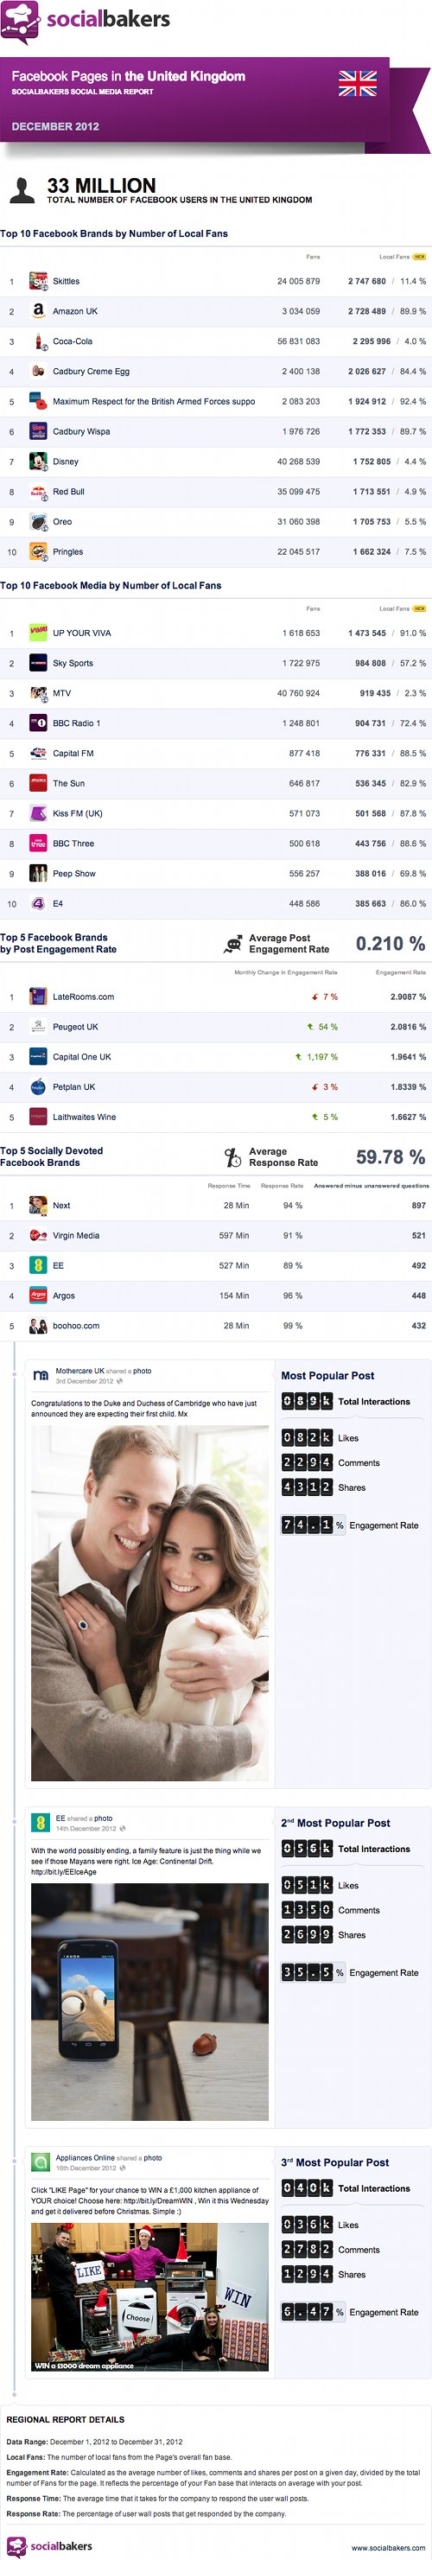 Top Facebook Pages in the UK, Dec ’12